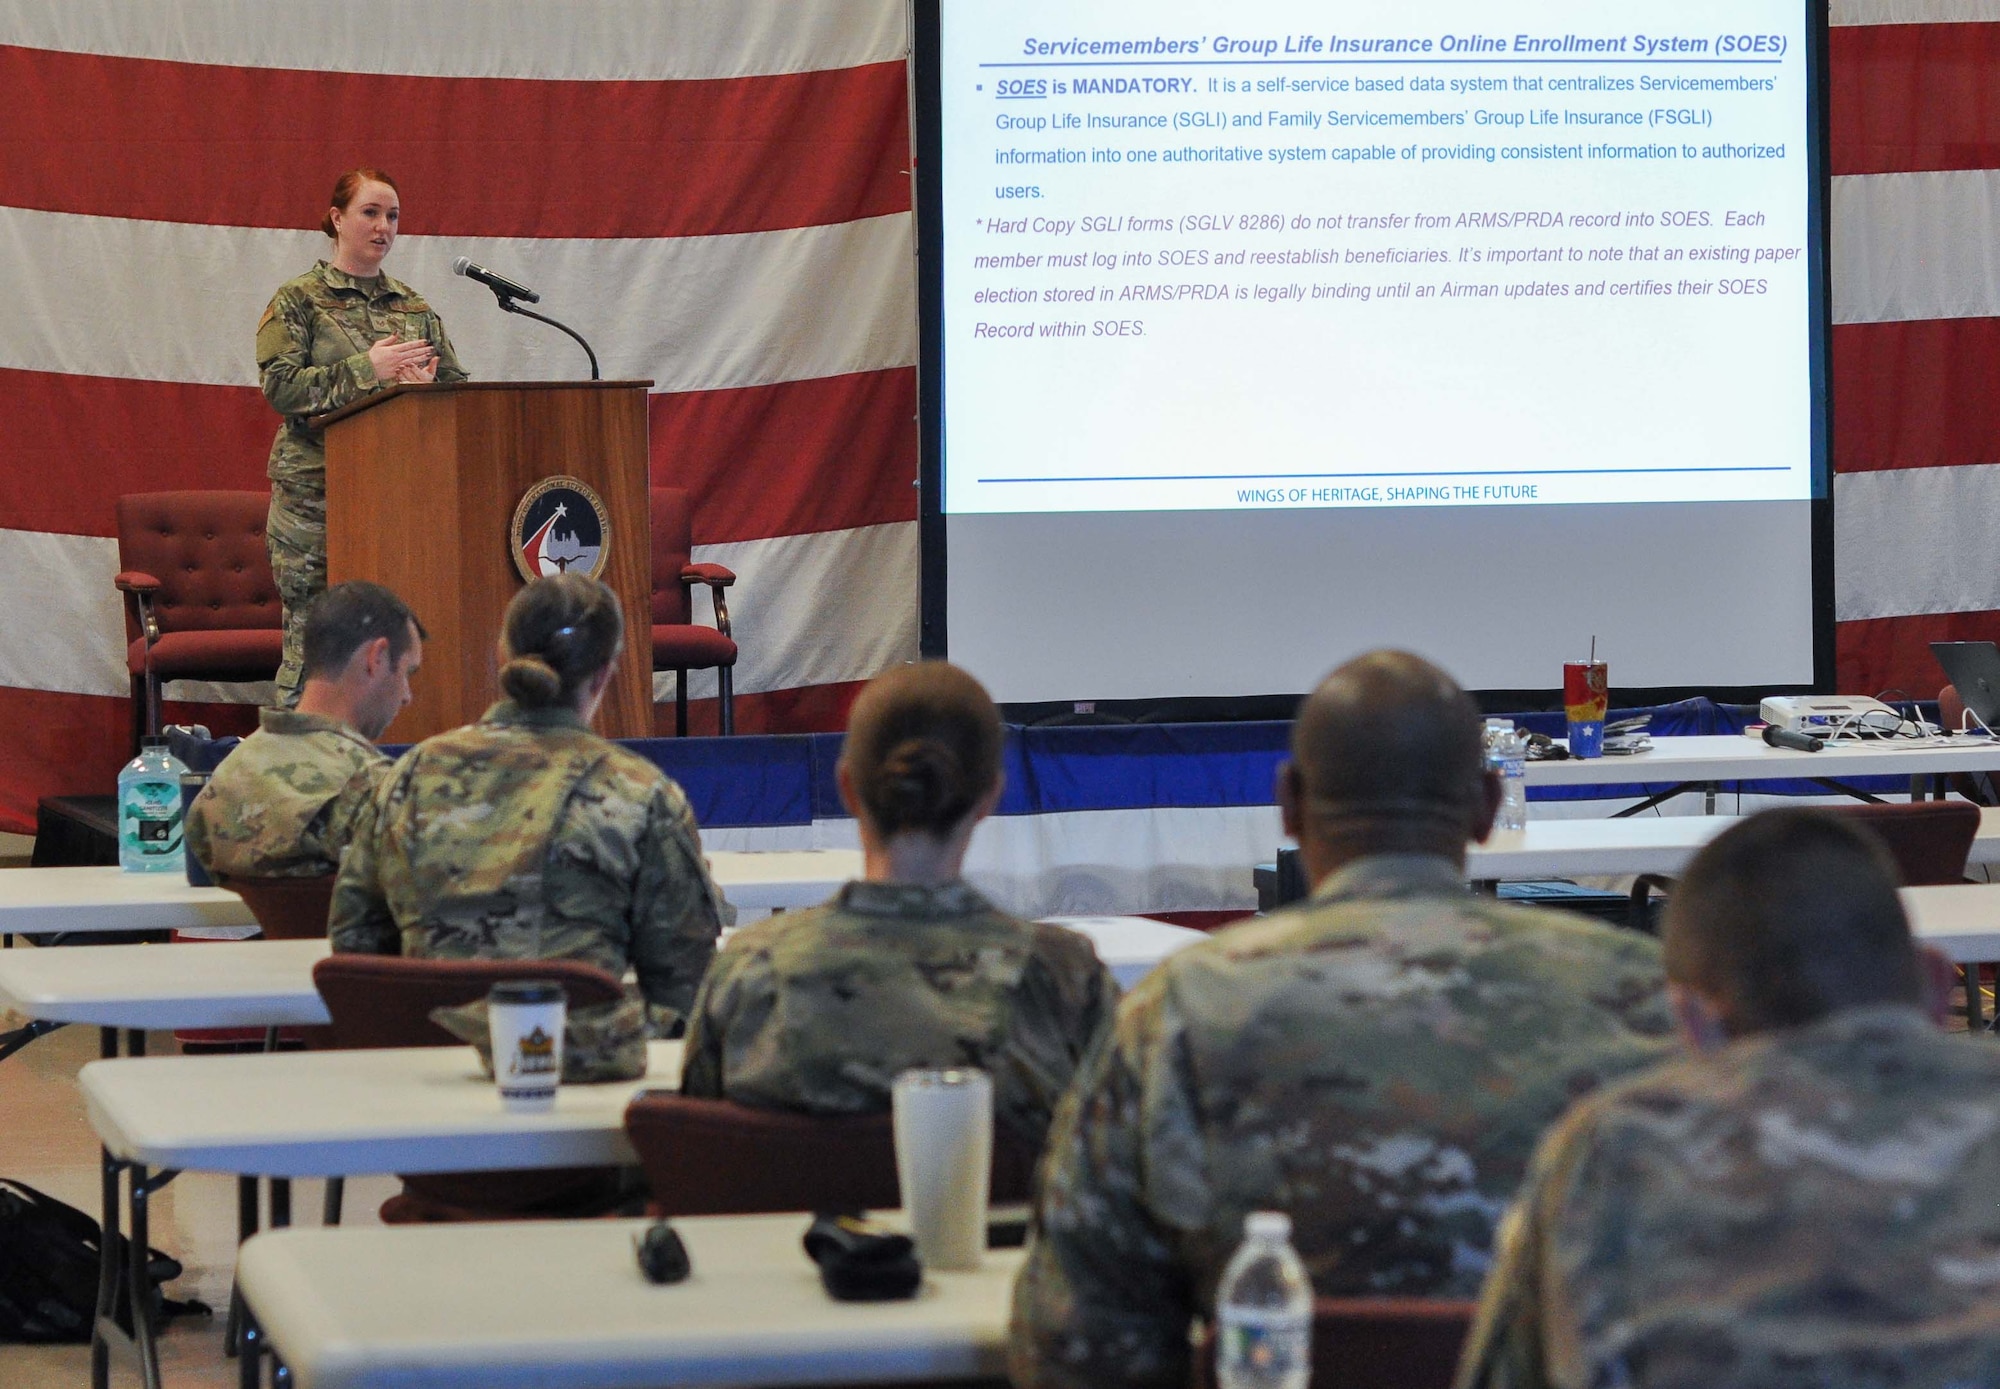 NCOIC Customer Support Staff Sgt. Amanda Rehberg, 301st Fighter Wing Force Support Squadron, presents a Servicemembers’ Group Life Insurance coverage brief to wing leadership during the Officer Leadership Summit at U.S. Naval Air Station Joint Reserve Base Fort Worth, Texas, on November 17, 2020. SGLI offers low-cost term coverage to eligible service members and the brief helps leaders ensure their Airmen understand programs benefits and how to verify coverage. (U.S. Air Force photo by Senior Airman William Downs)